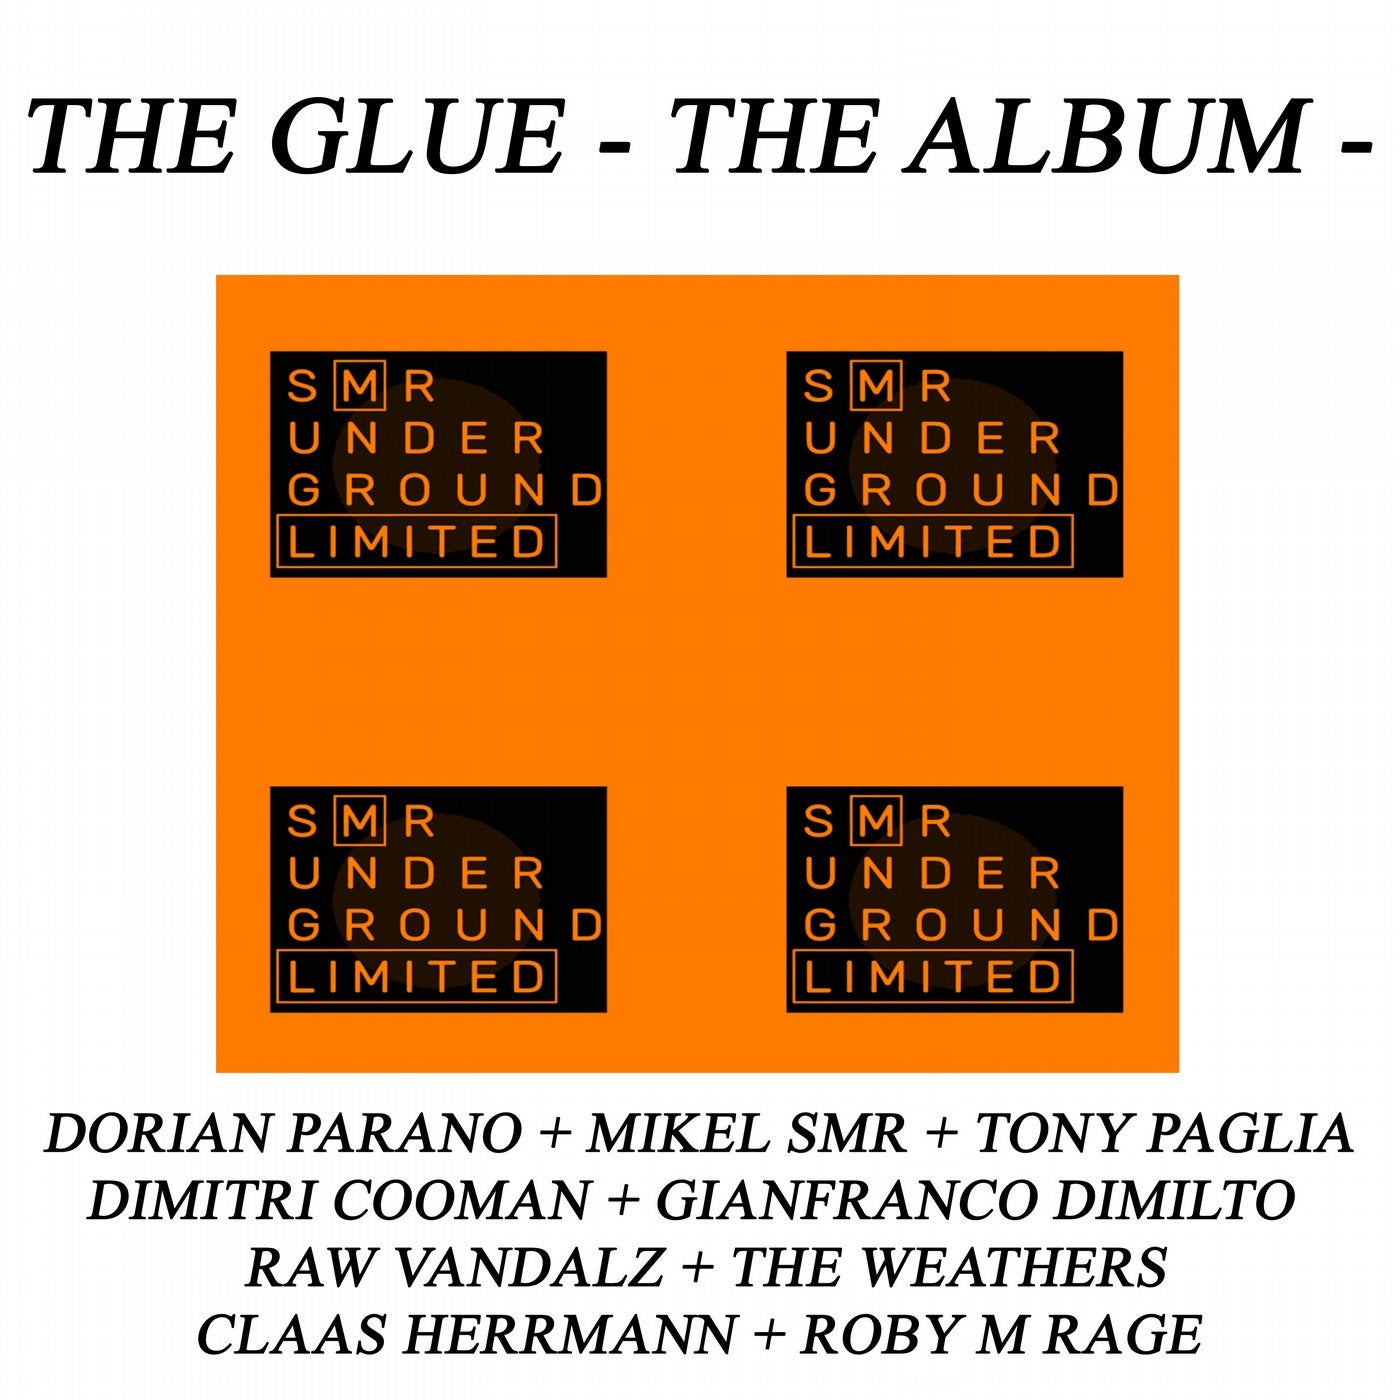 The Glue - The Remixes -